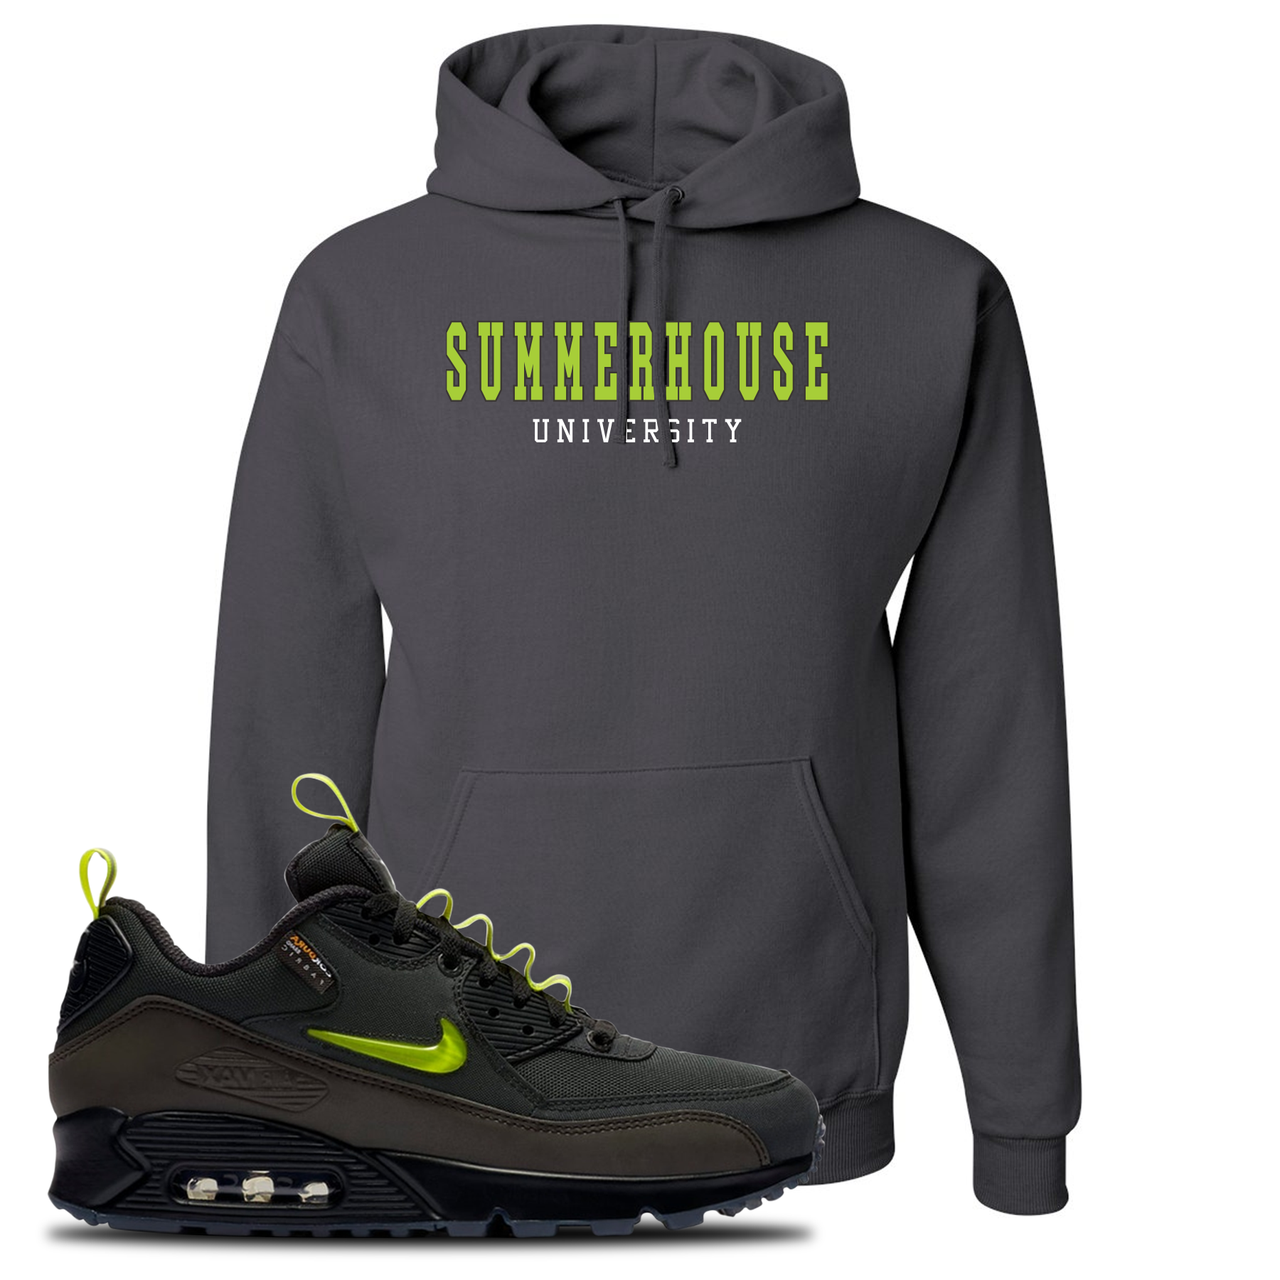 The Basement X Air Max 90 Manchester Summerhouse University Charcoal Gray Sneaker Hook Up Pullover Hoodie